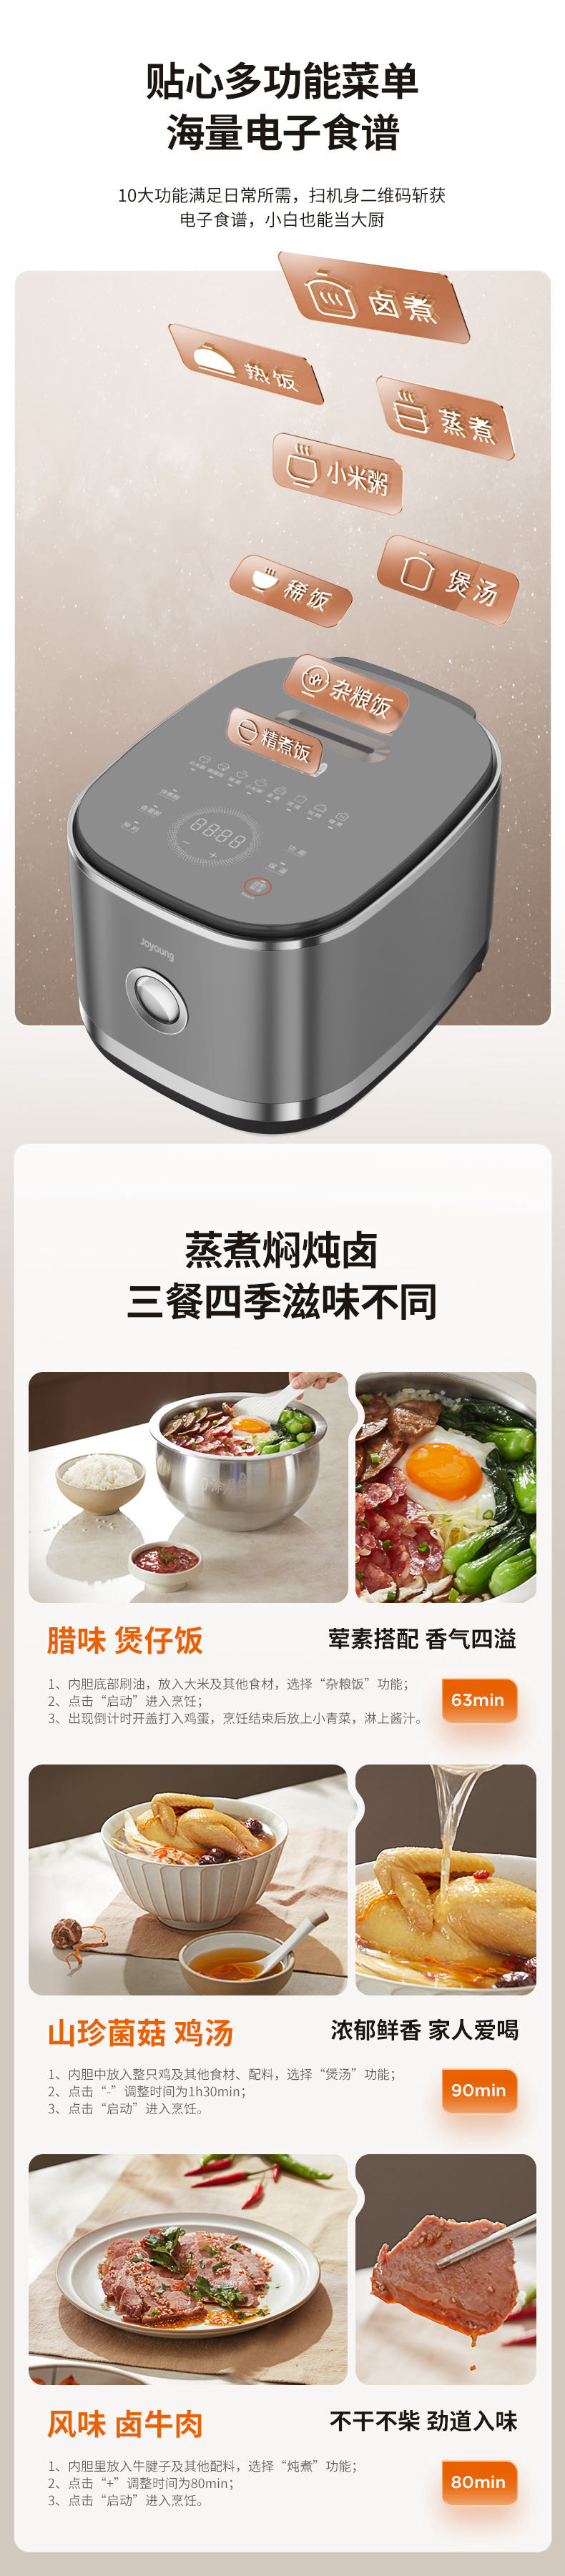 Joyoung's 2nd generation 0-coating IH heating rice cooker C8M-RC5G, 304 stainless steel inner pot, 4L uncoated multi-function rice cooker, high-quality domestic product